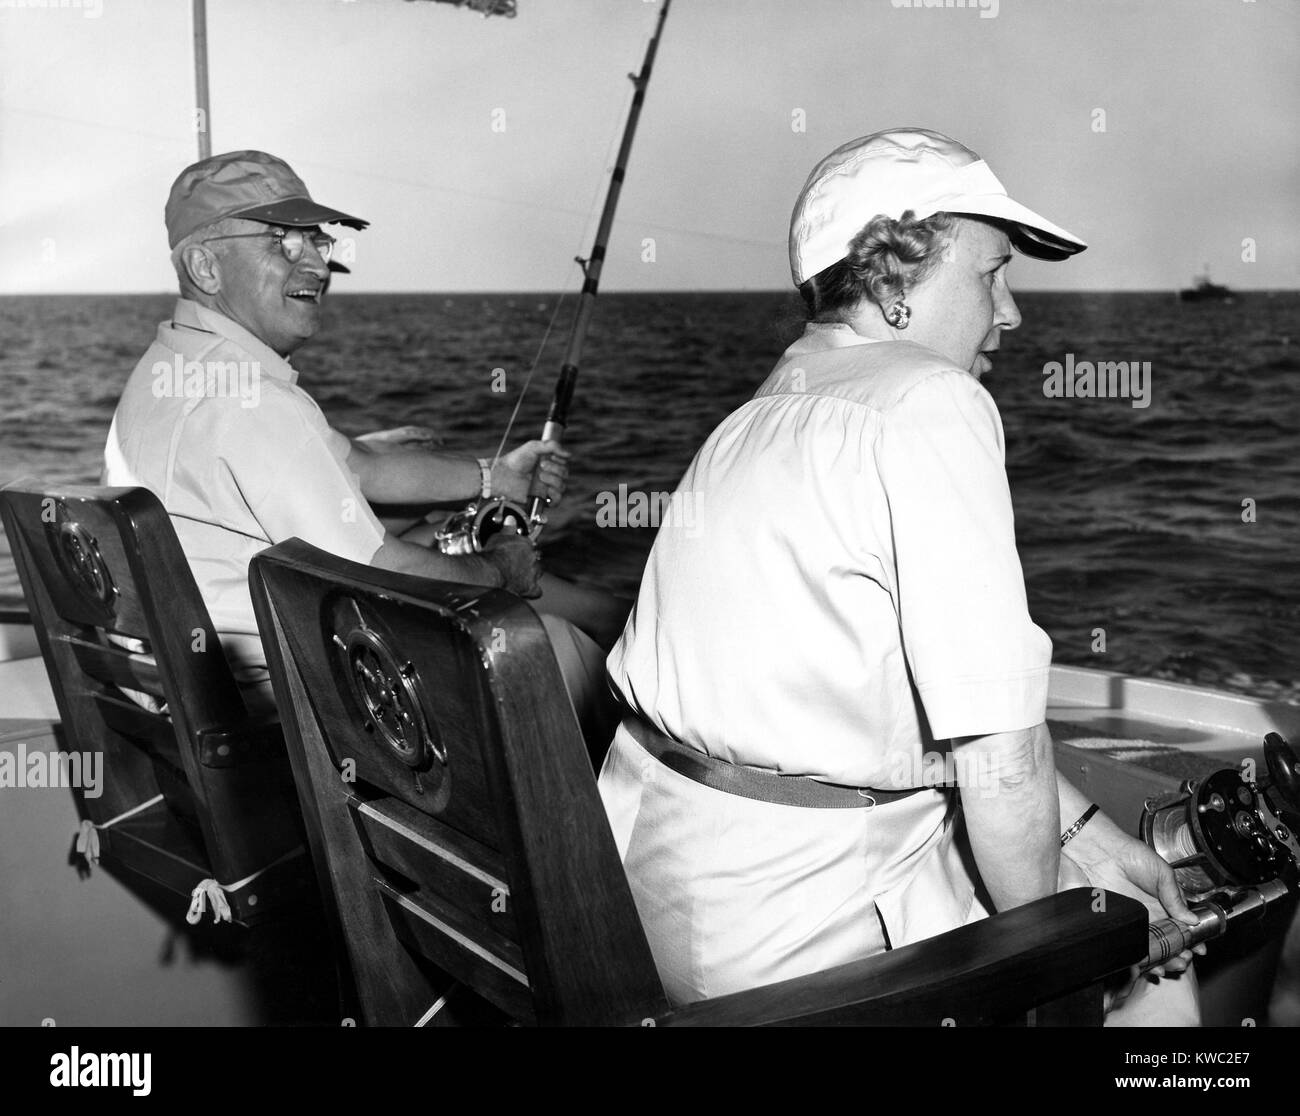 President Harry and Bess Truman Fishing near Key West, Florida, Dec. 2, 1949. They spent 11 working vacations, 175 days in all, at the 'Little White House' during his presidency. (BSLOC 2015 2 235) Stock Photo